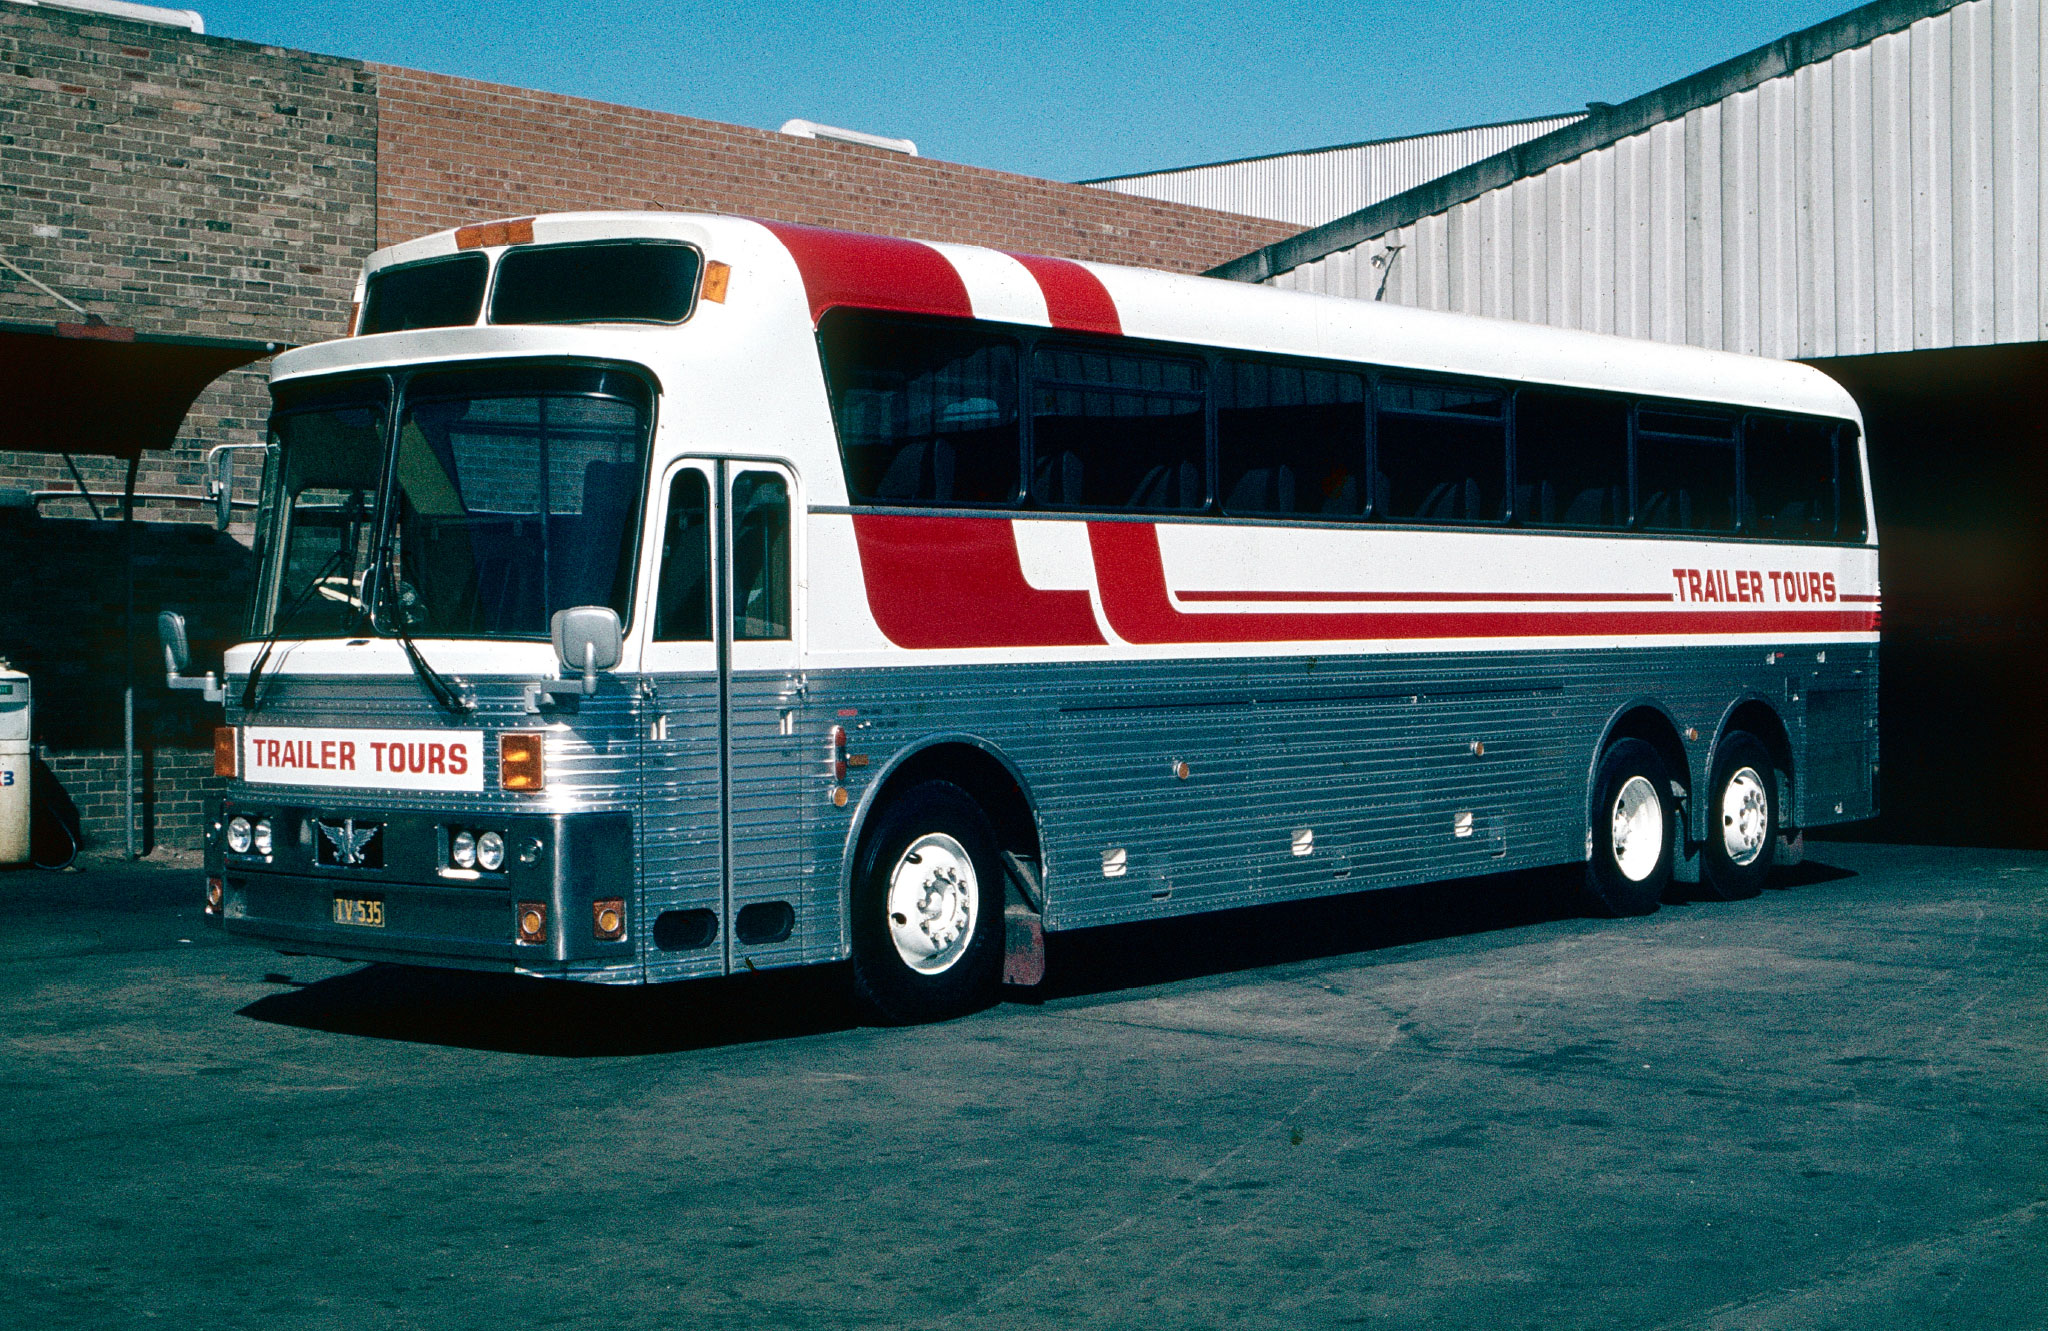 Eagle Model 05 bus, 1977 model with Trailer Tours livery. Photo taken in August 1984.